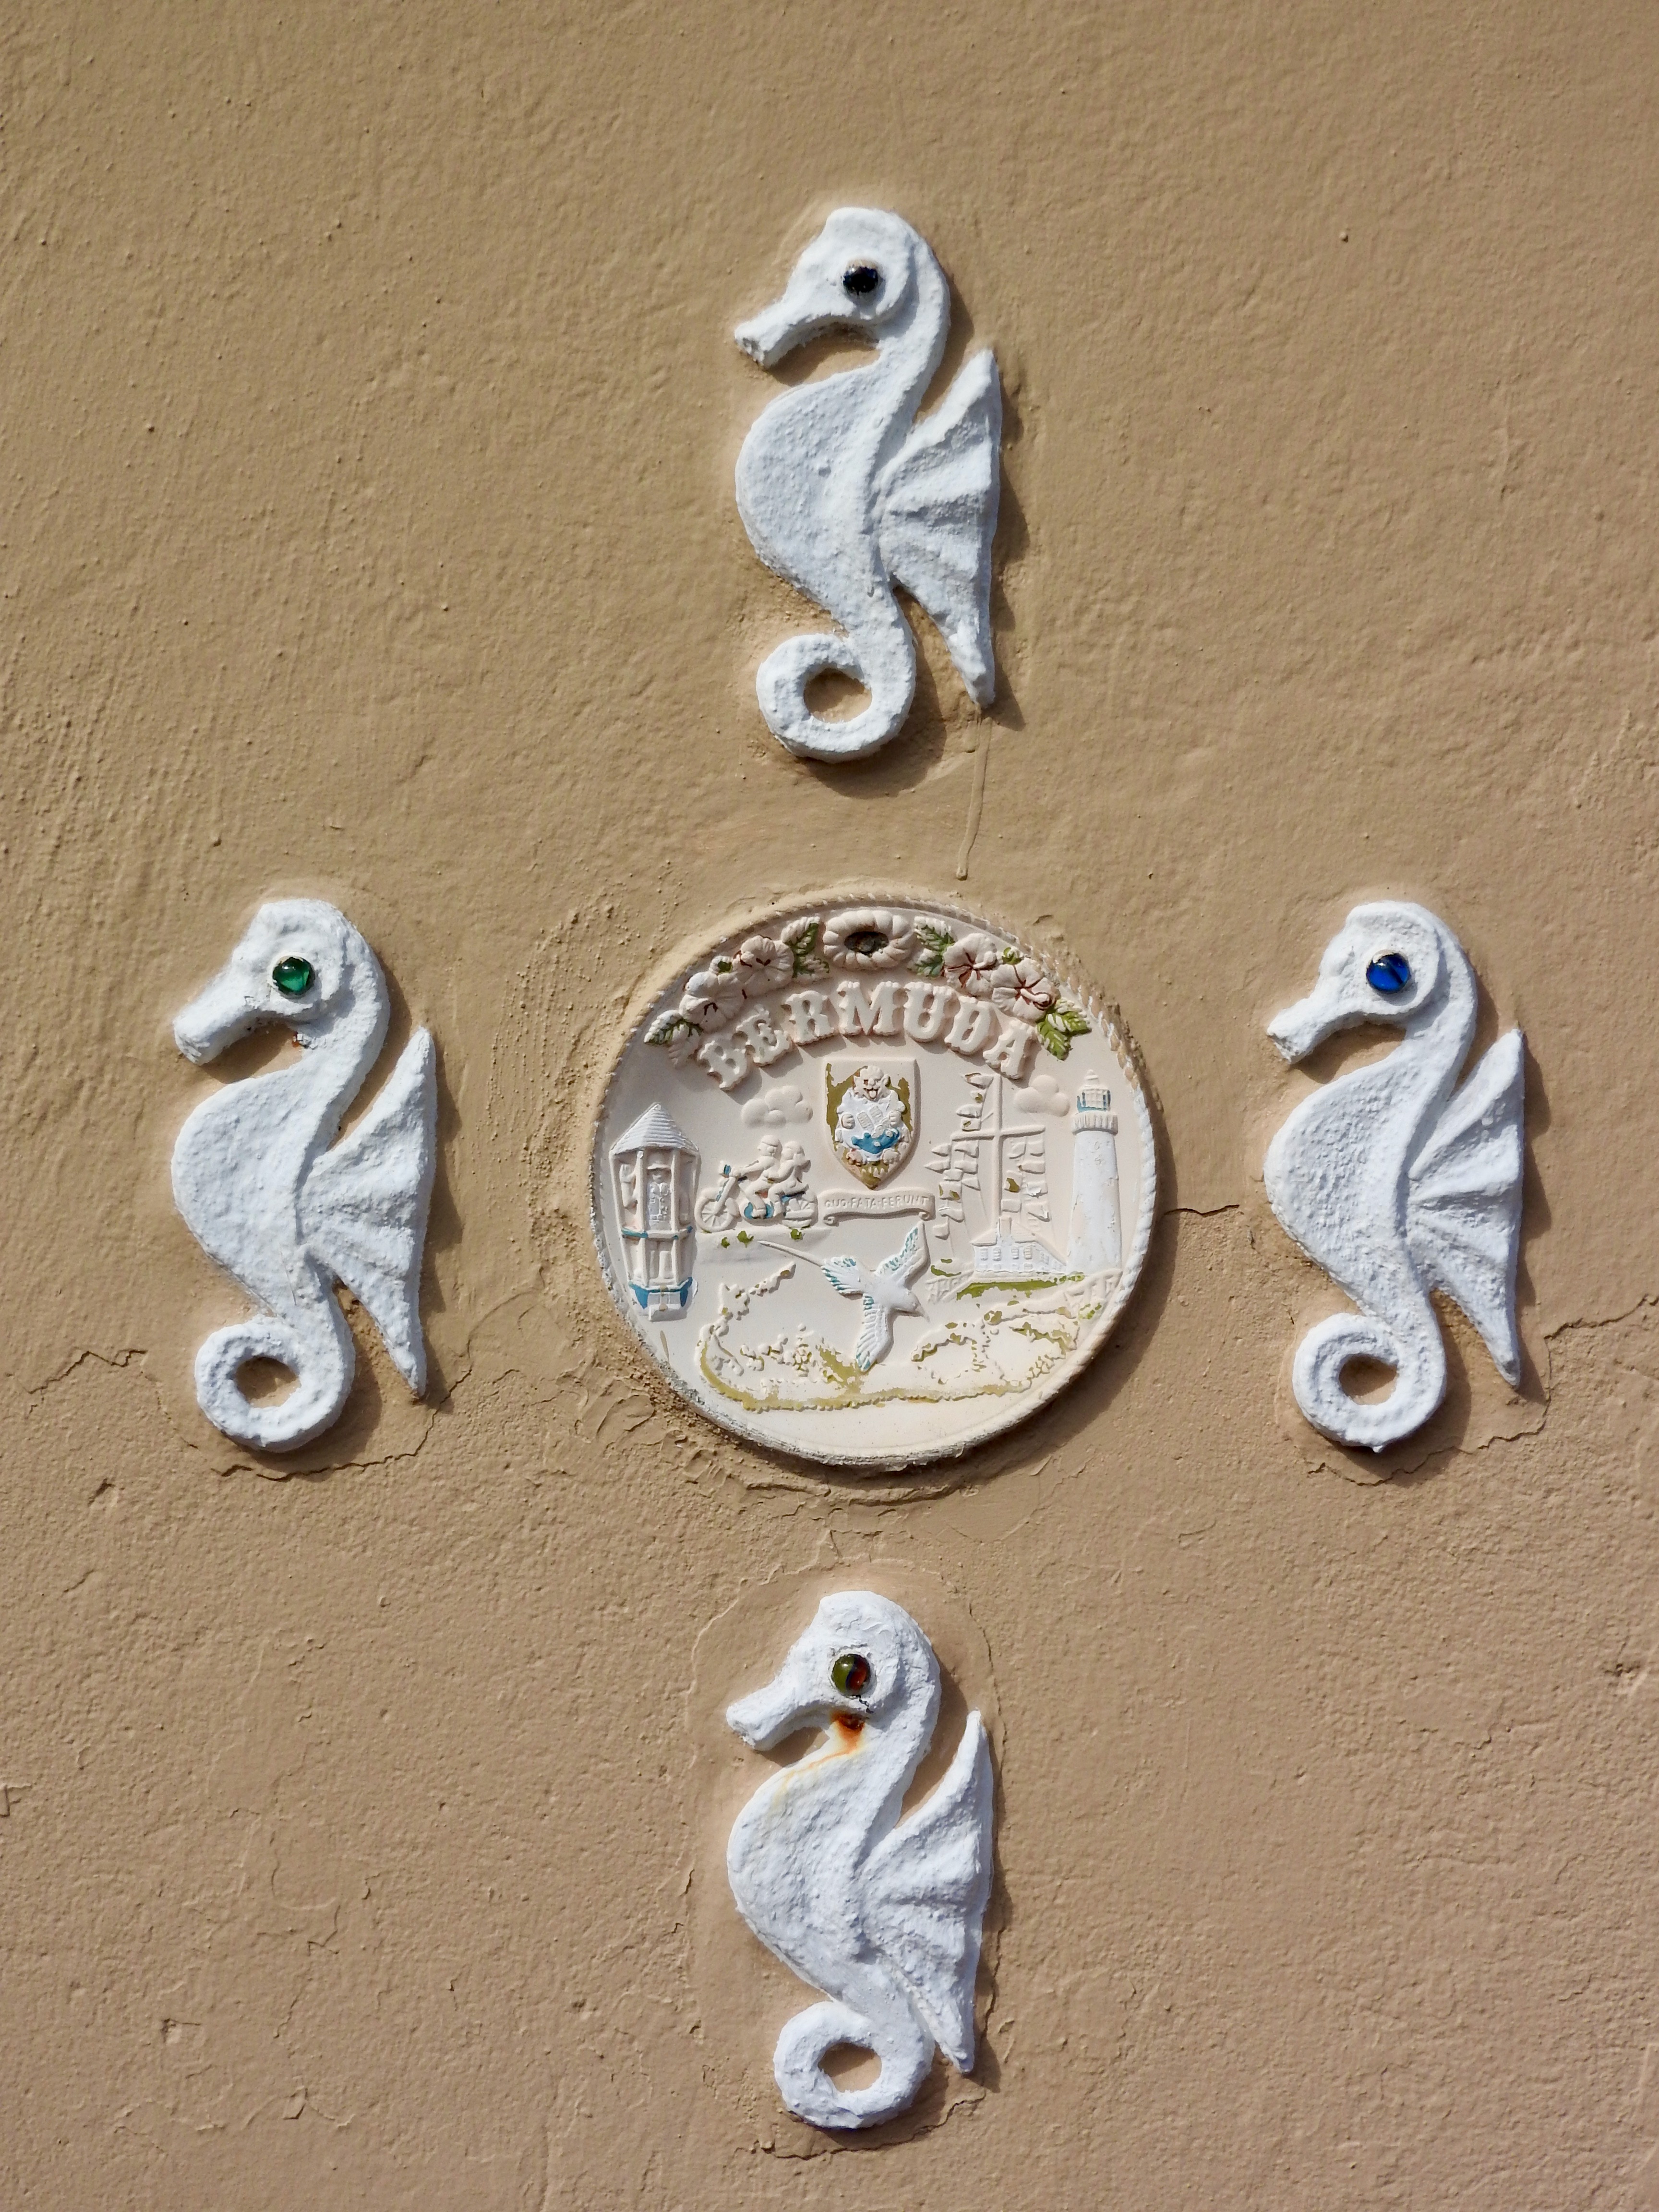 An architectural detail seen on a building near Tobacco Bay in St. George's, Bermuda